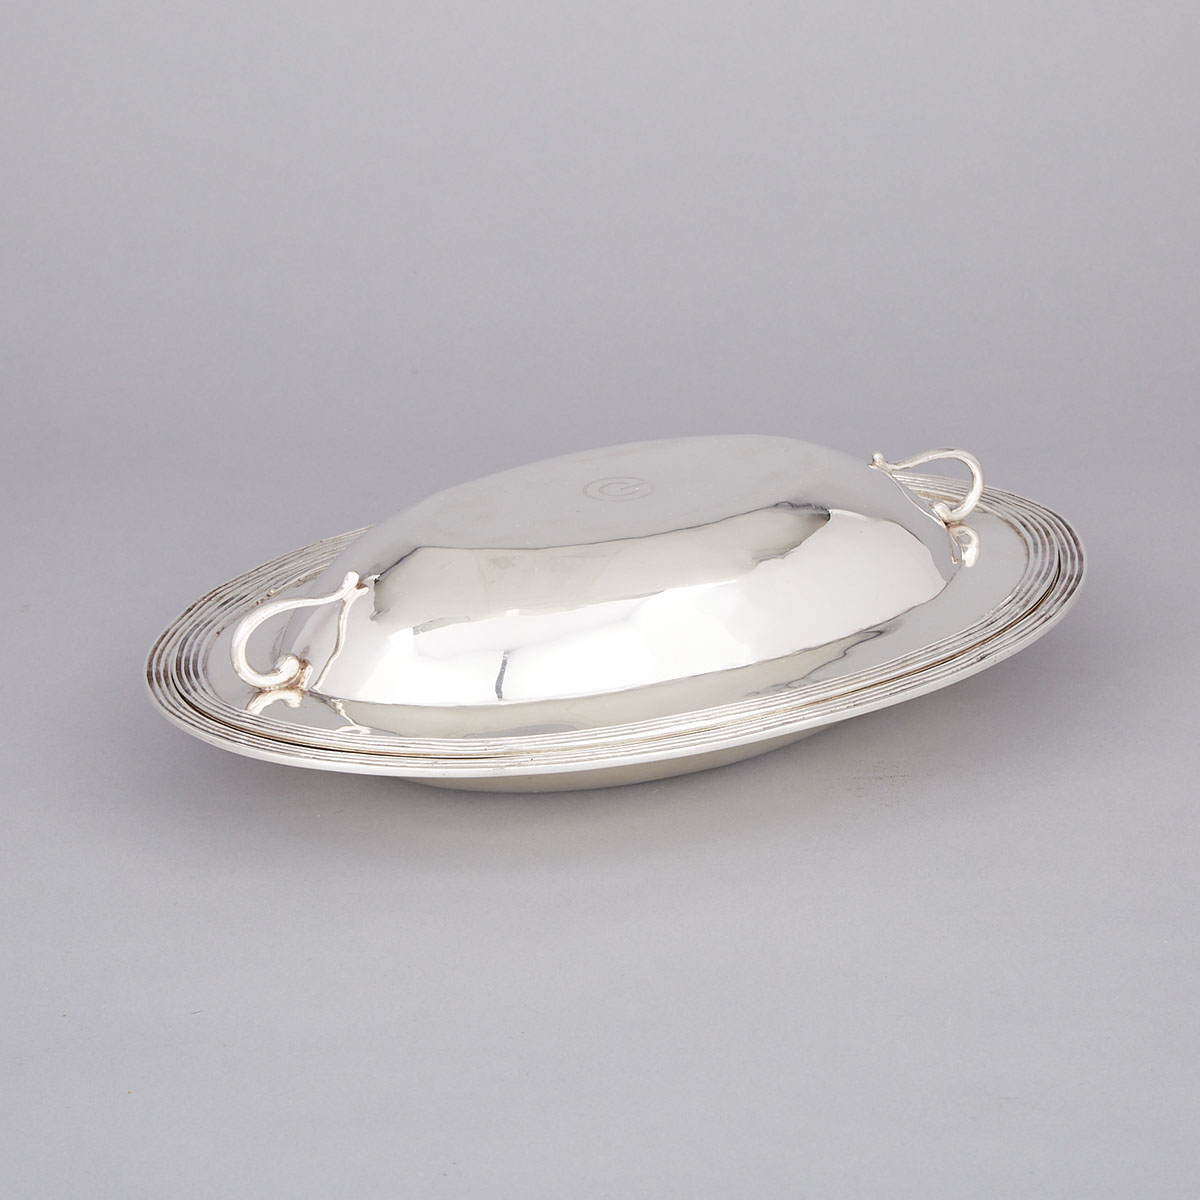 South American Silver Covered Oval Entree Dish, 20th century